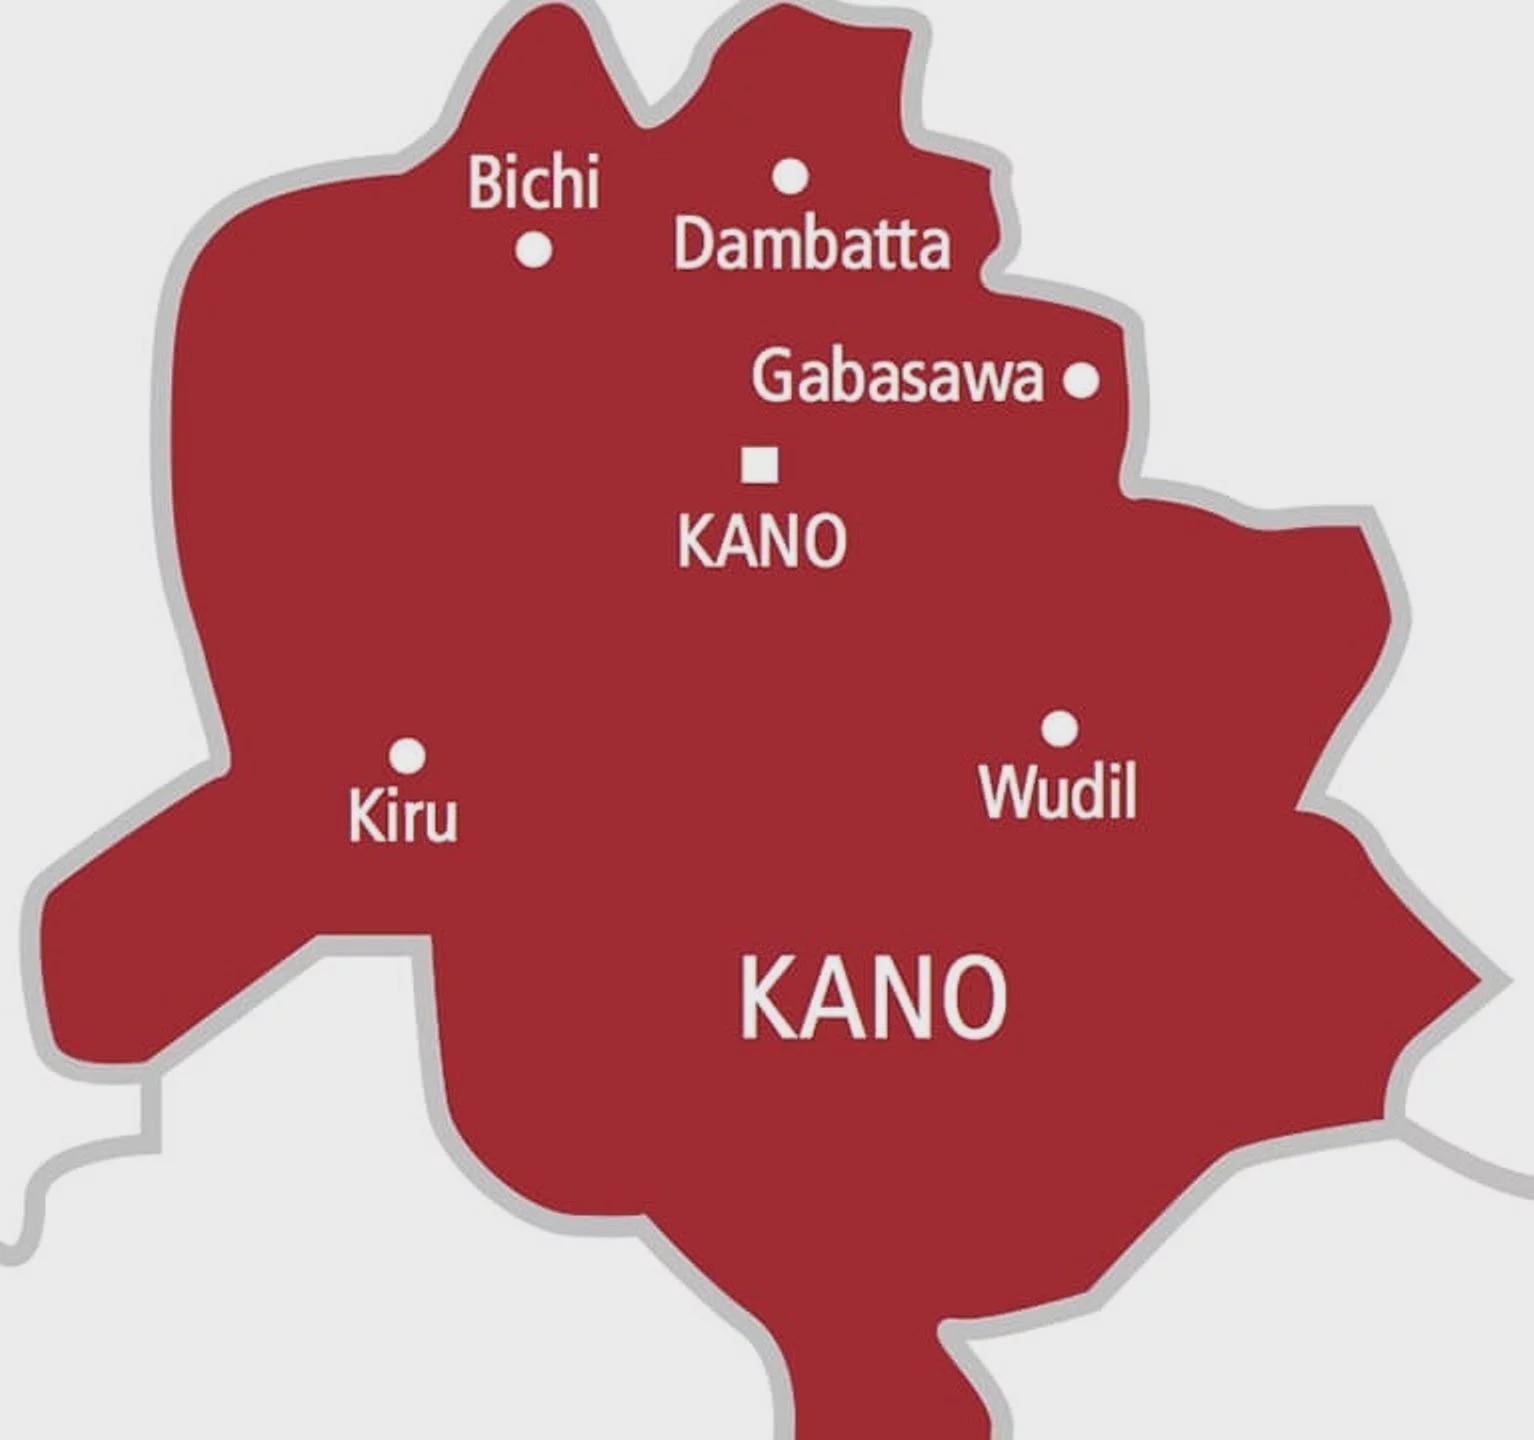 Two killed as rival gangs engage in supremacy battle in Kano